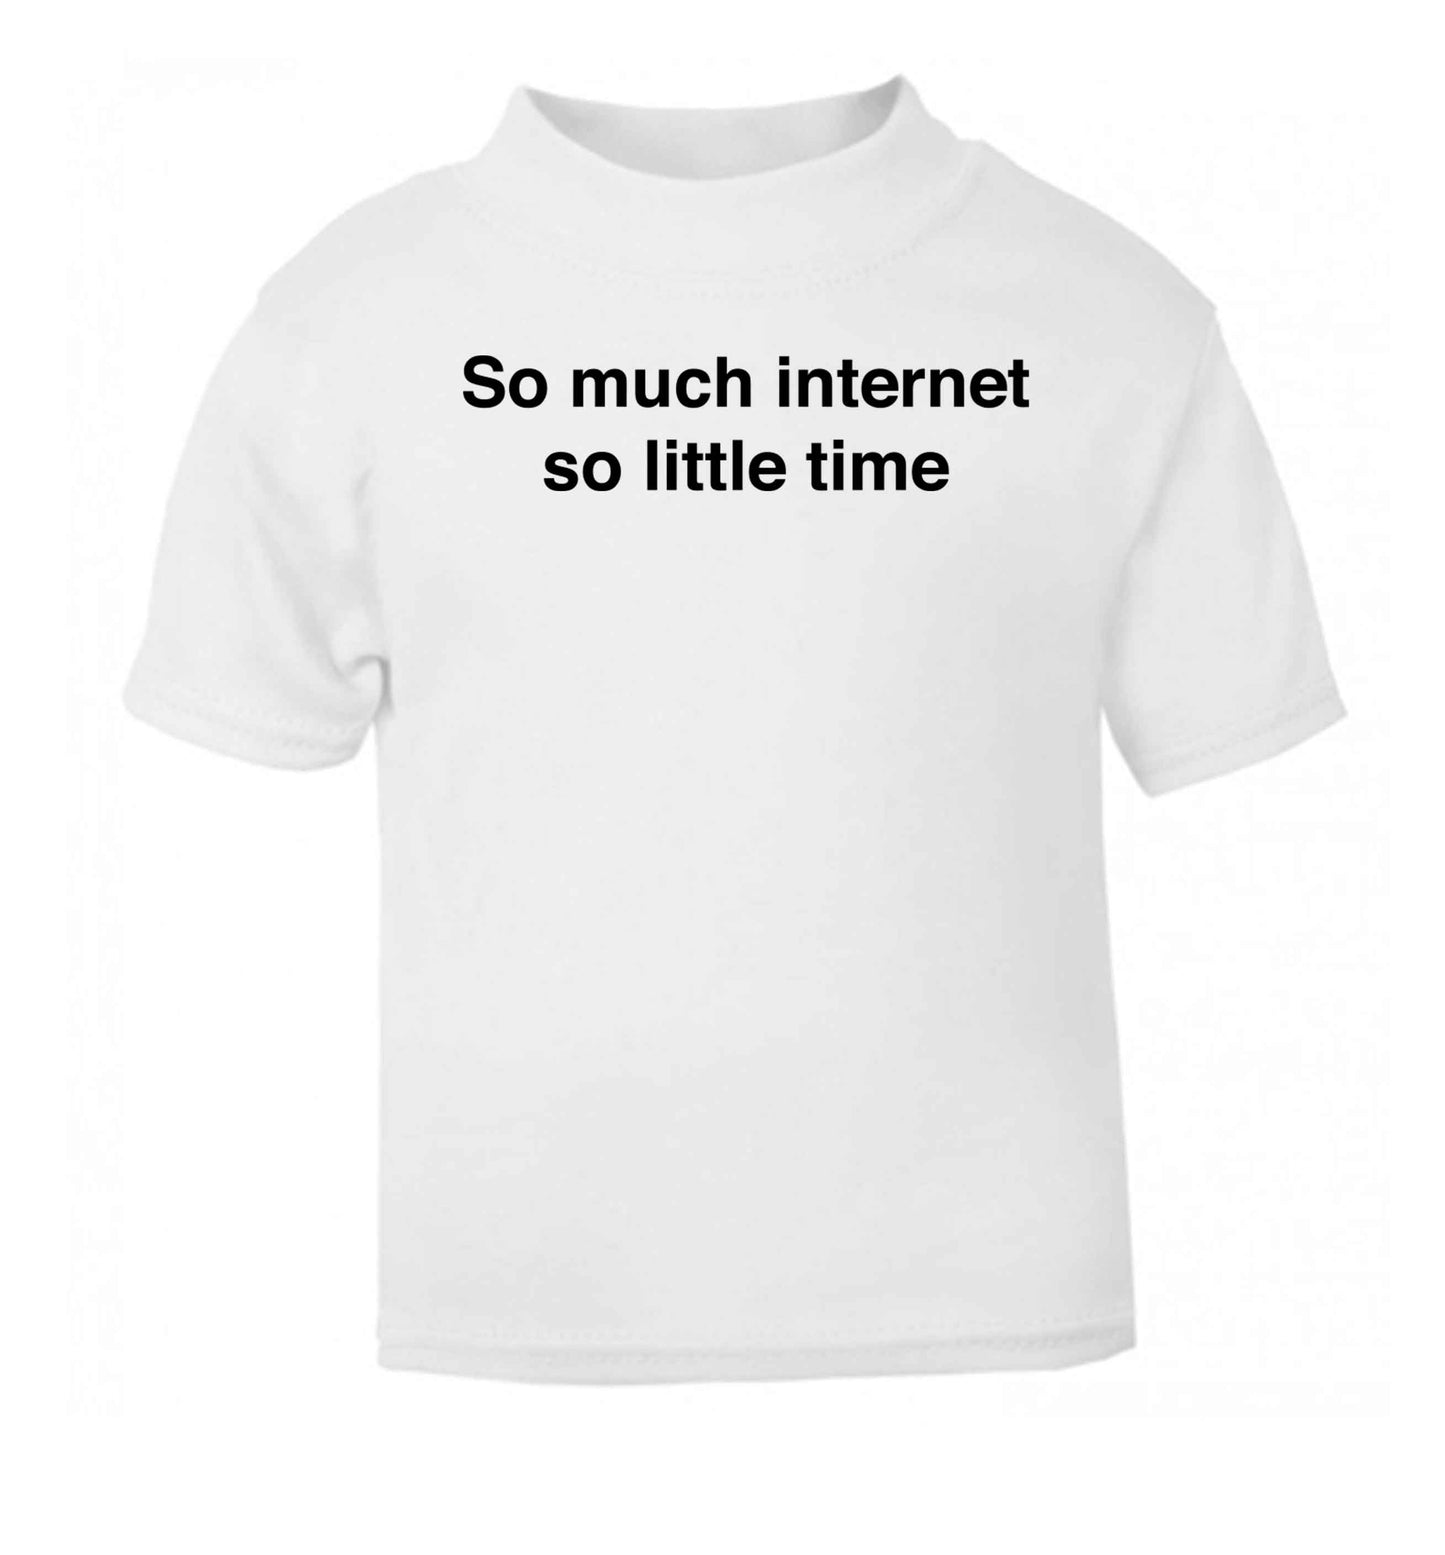 So much internet so little time white baby toddler Tshirt 2 Years